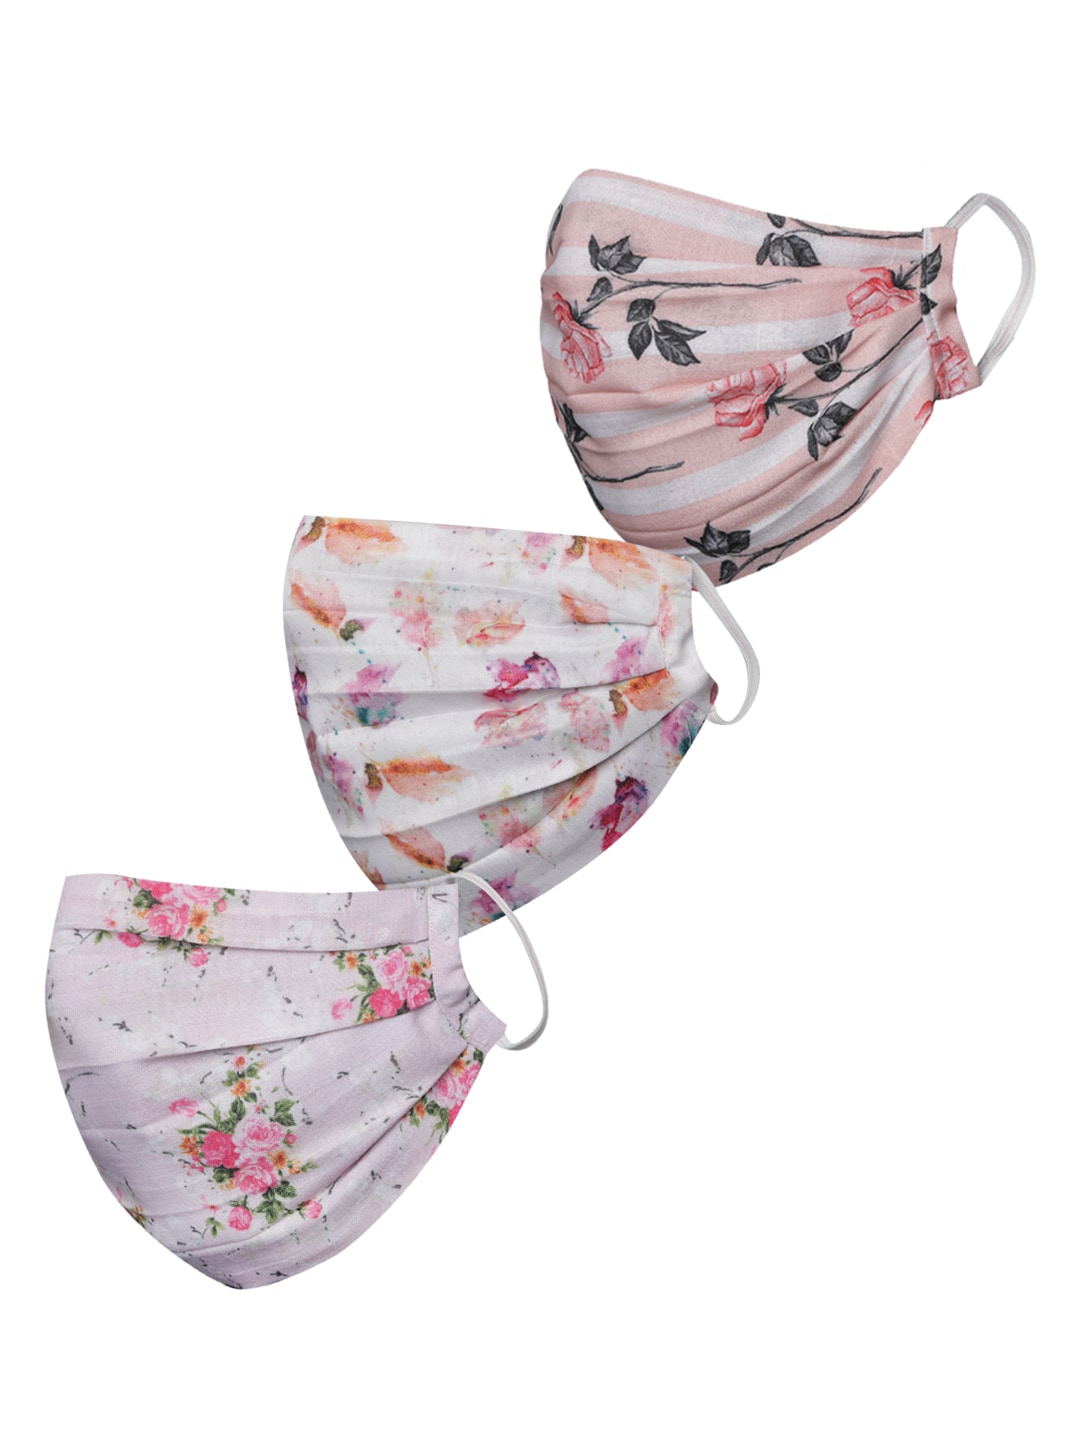 VASTRAMAY Unisex Set of 3 Reusable Printed 2-Ply Protective Outdoor Face Masks Price in India